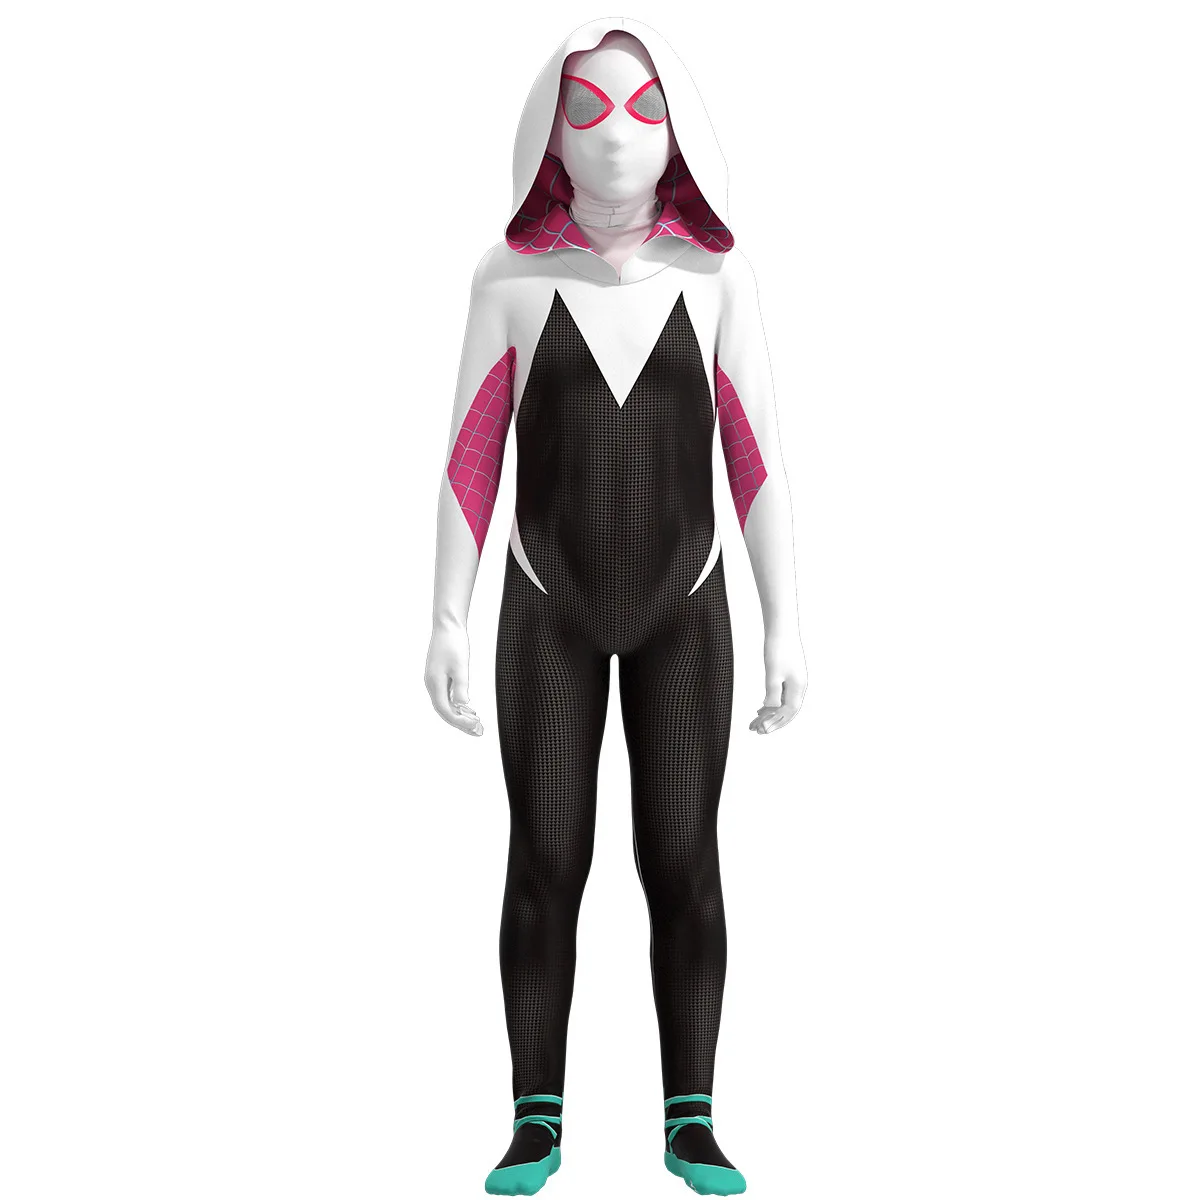 Spider-man Spiderman Costume Fancy Jumpsuit Adult And Children Halloween  Cosplay Costume White Pink Spandex 3d Cosplay Clothing - Buy Cosplay Costume,Halloween  Costume,Halloween Product on 